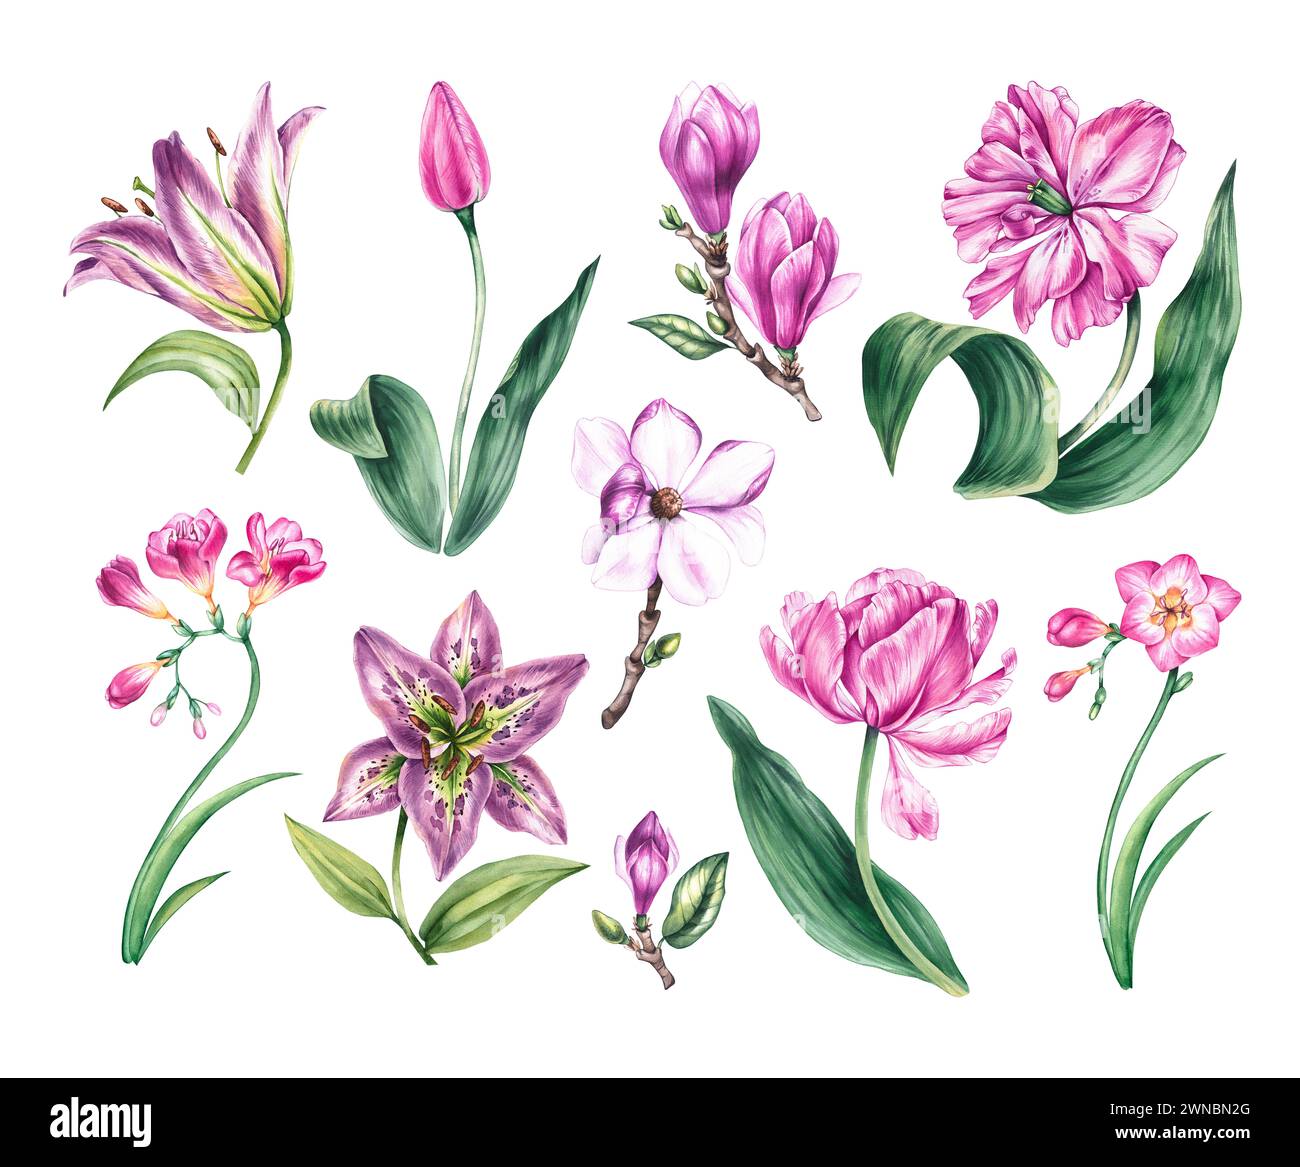 Watercolor collection of purple, pink flowers isolated. Watercolor tulips, freesias, lilies, magnolias on a white background for the design of cards, Stock Photo